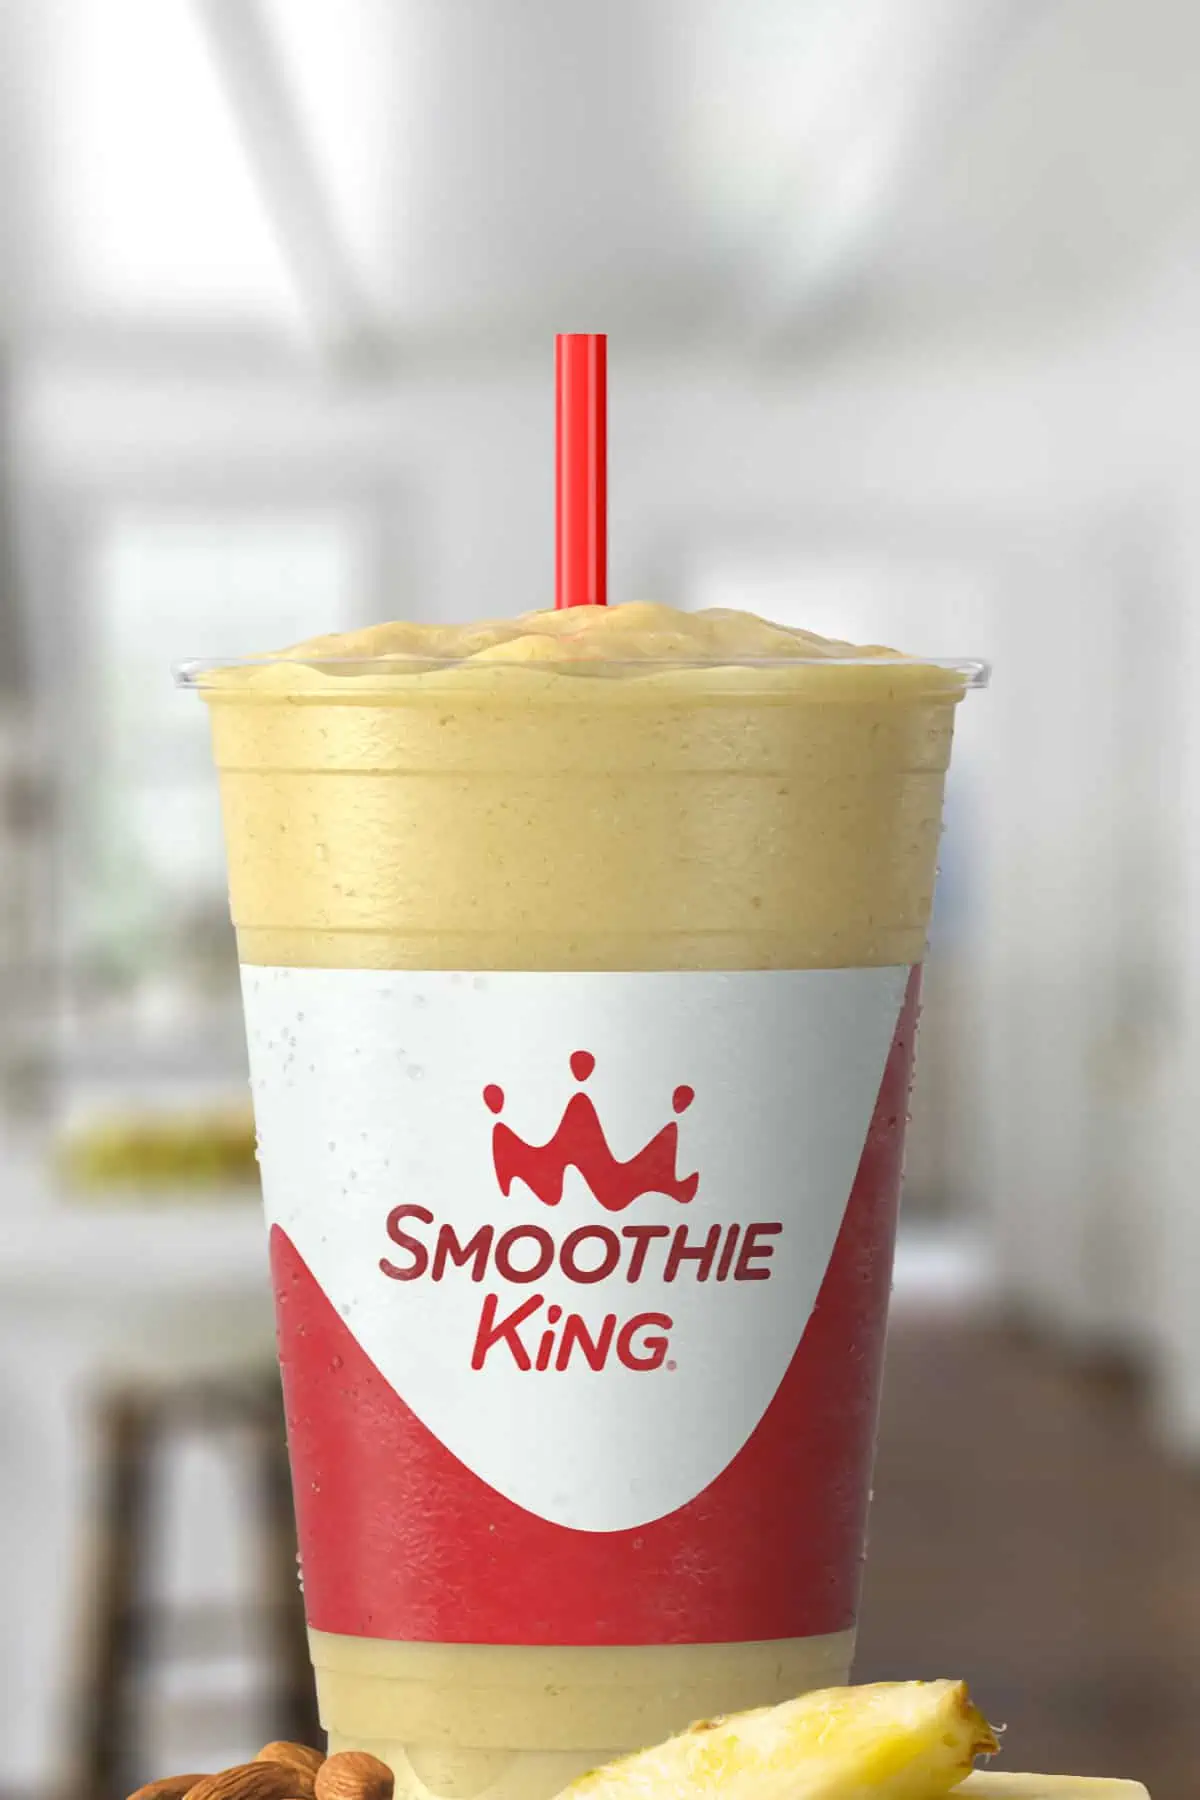 Smoothie King Original High Protein Pineapple smoothie in a glass, on my kitchen counter, surrounded by fresh fruit.